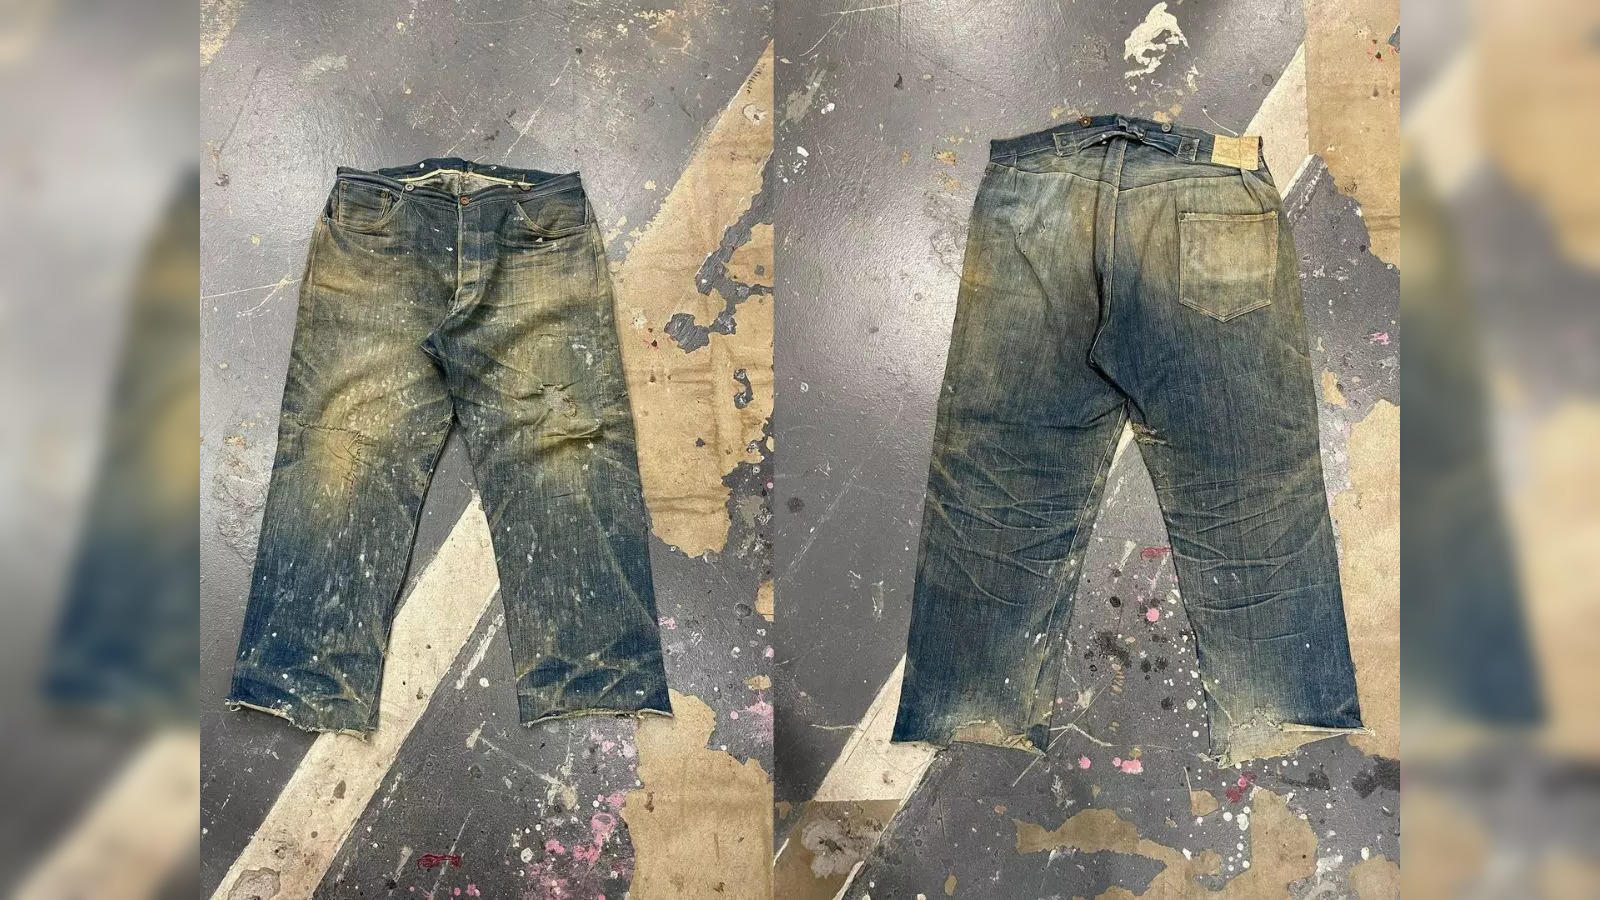 A pair of Levi's jeans from 1880s, found in abandoned mine, sells